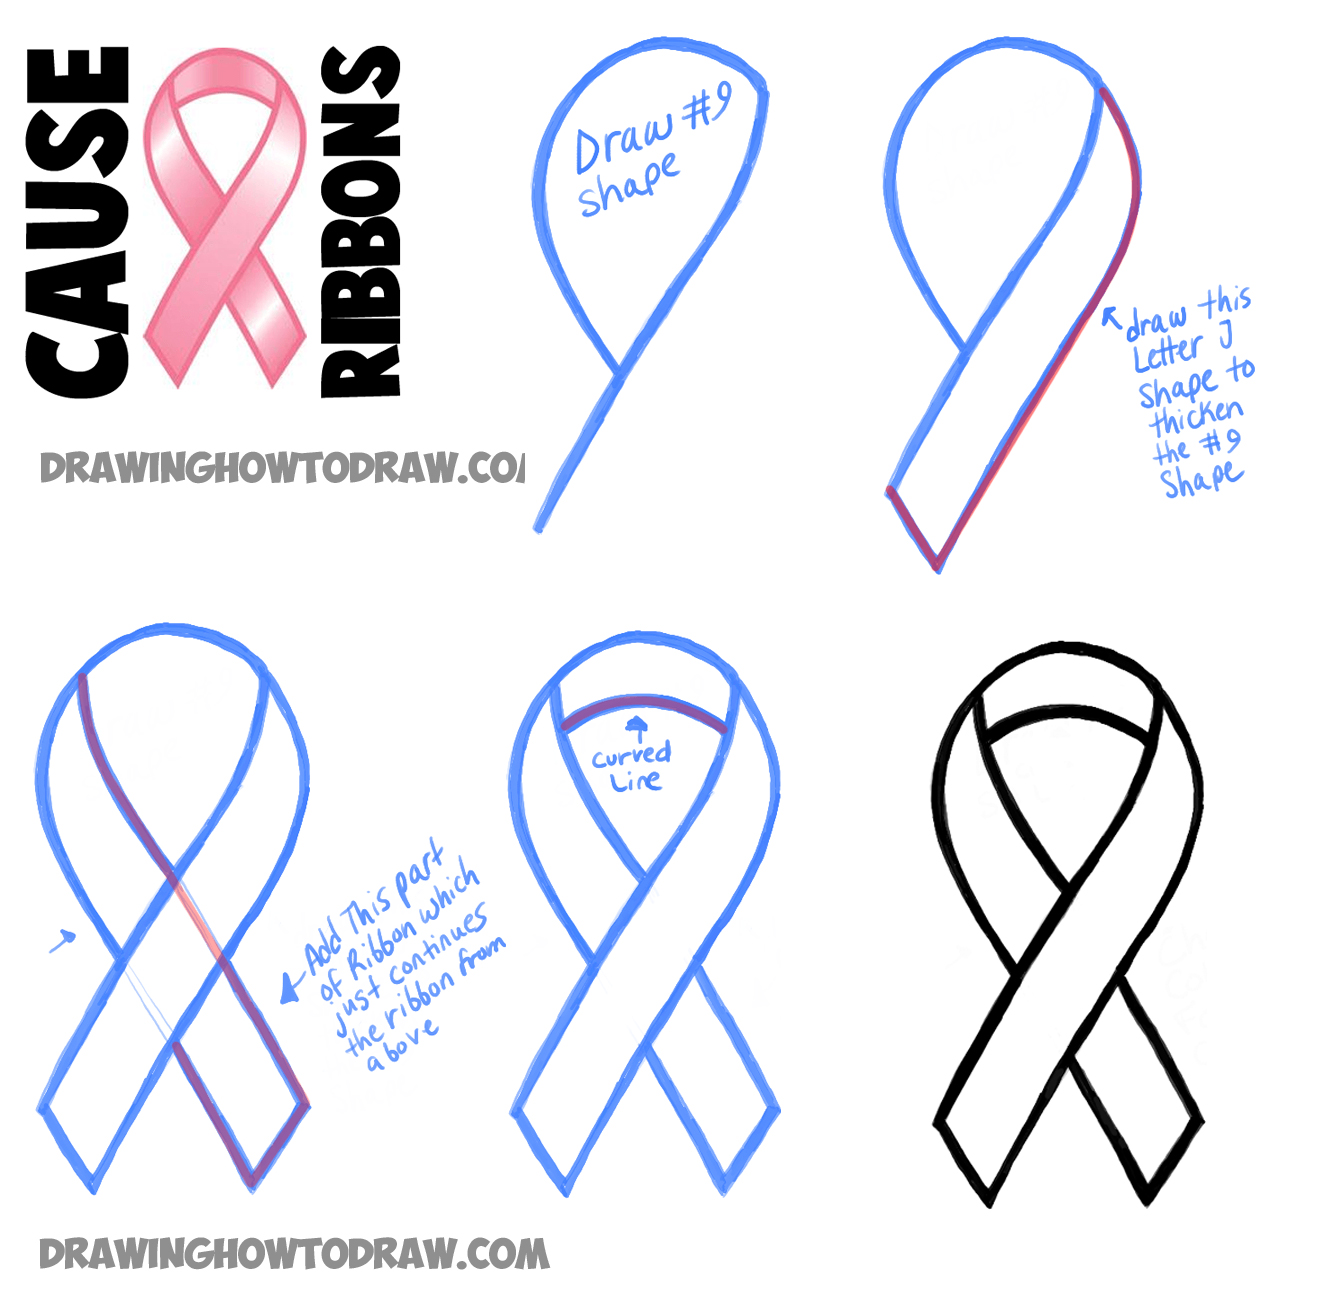 Drawing of a Cancer Ribbon